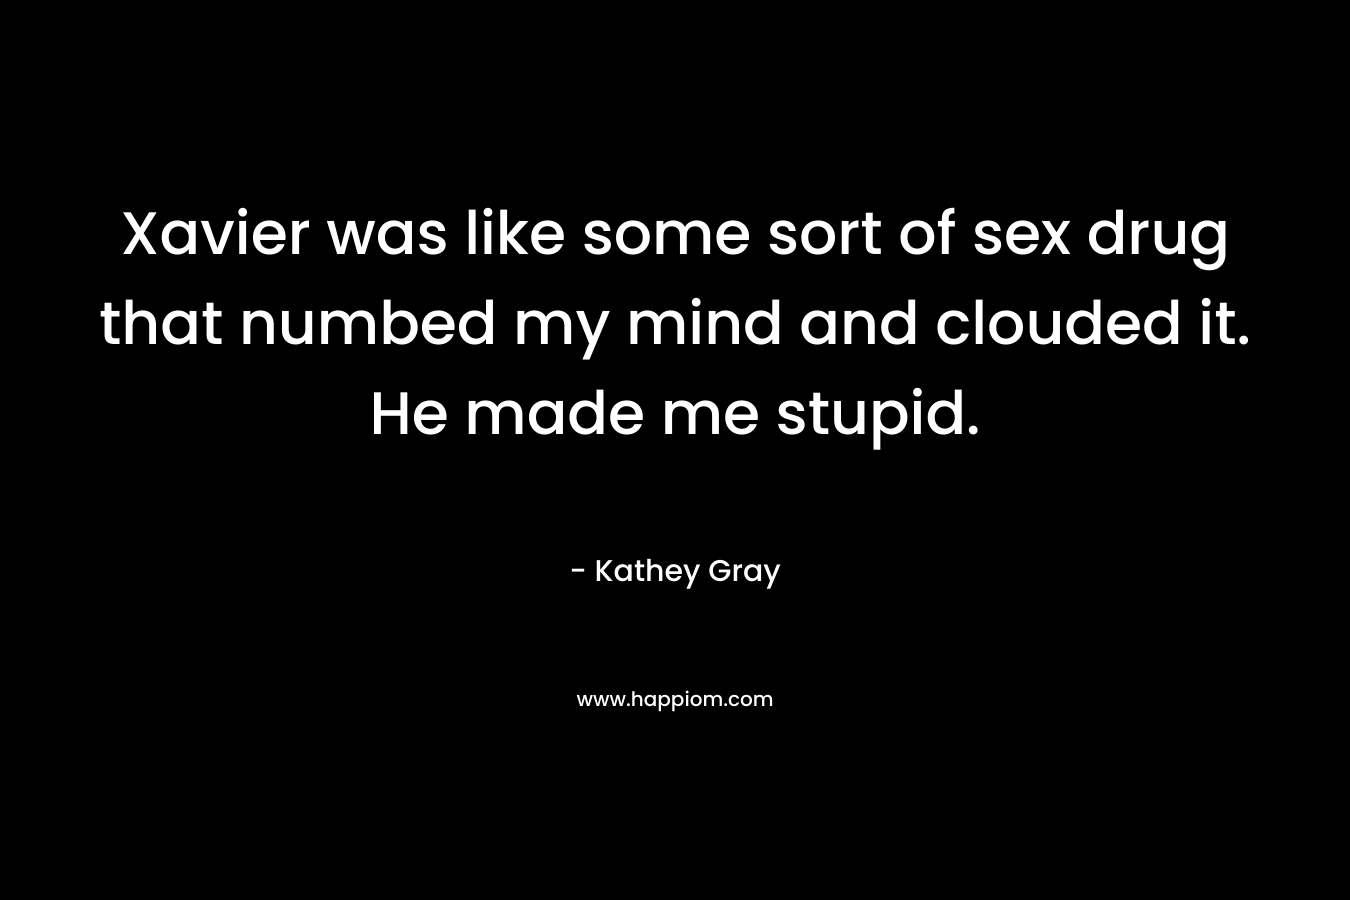 Xavier was like some sort of sex drug that numbed my mind and clouded it. He made me stupid. – Kathey Gray